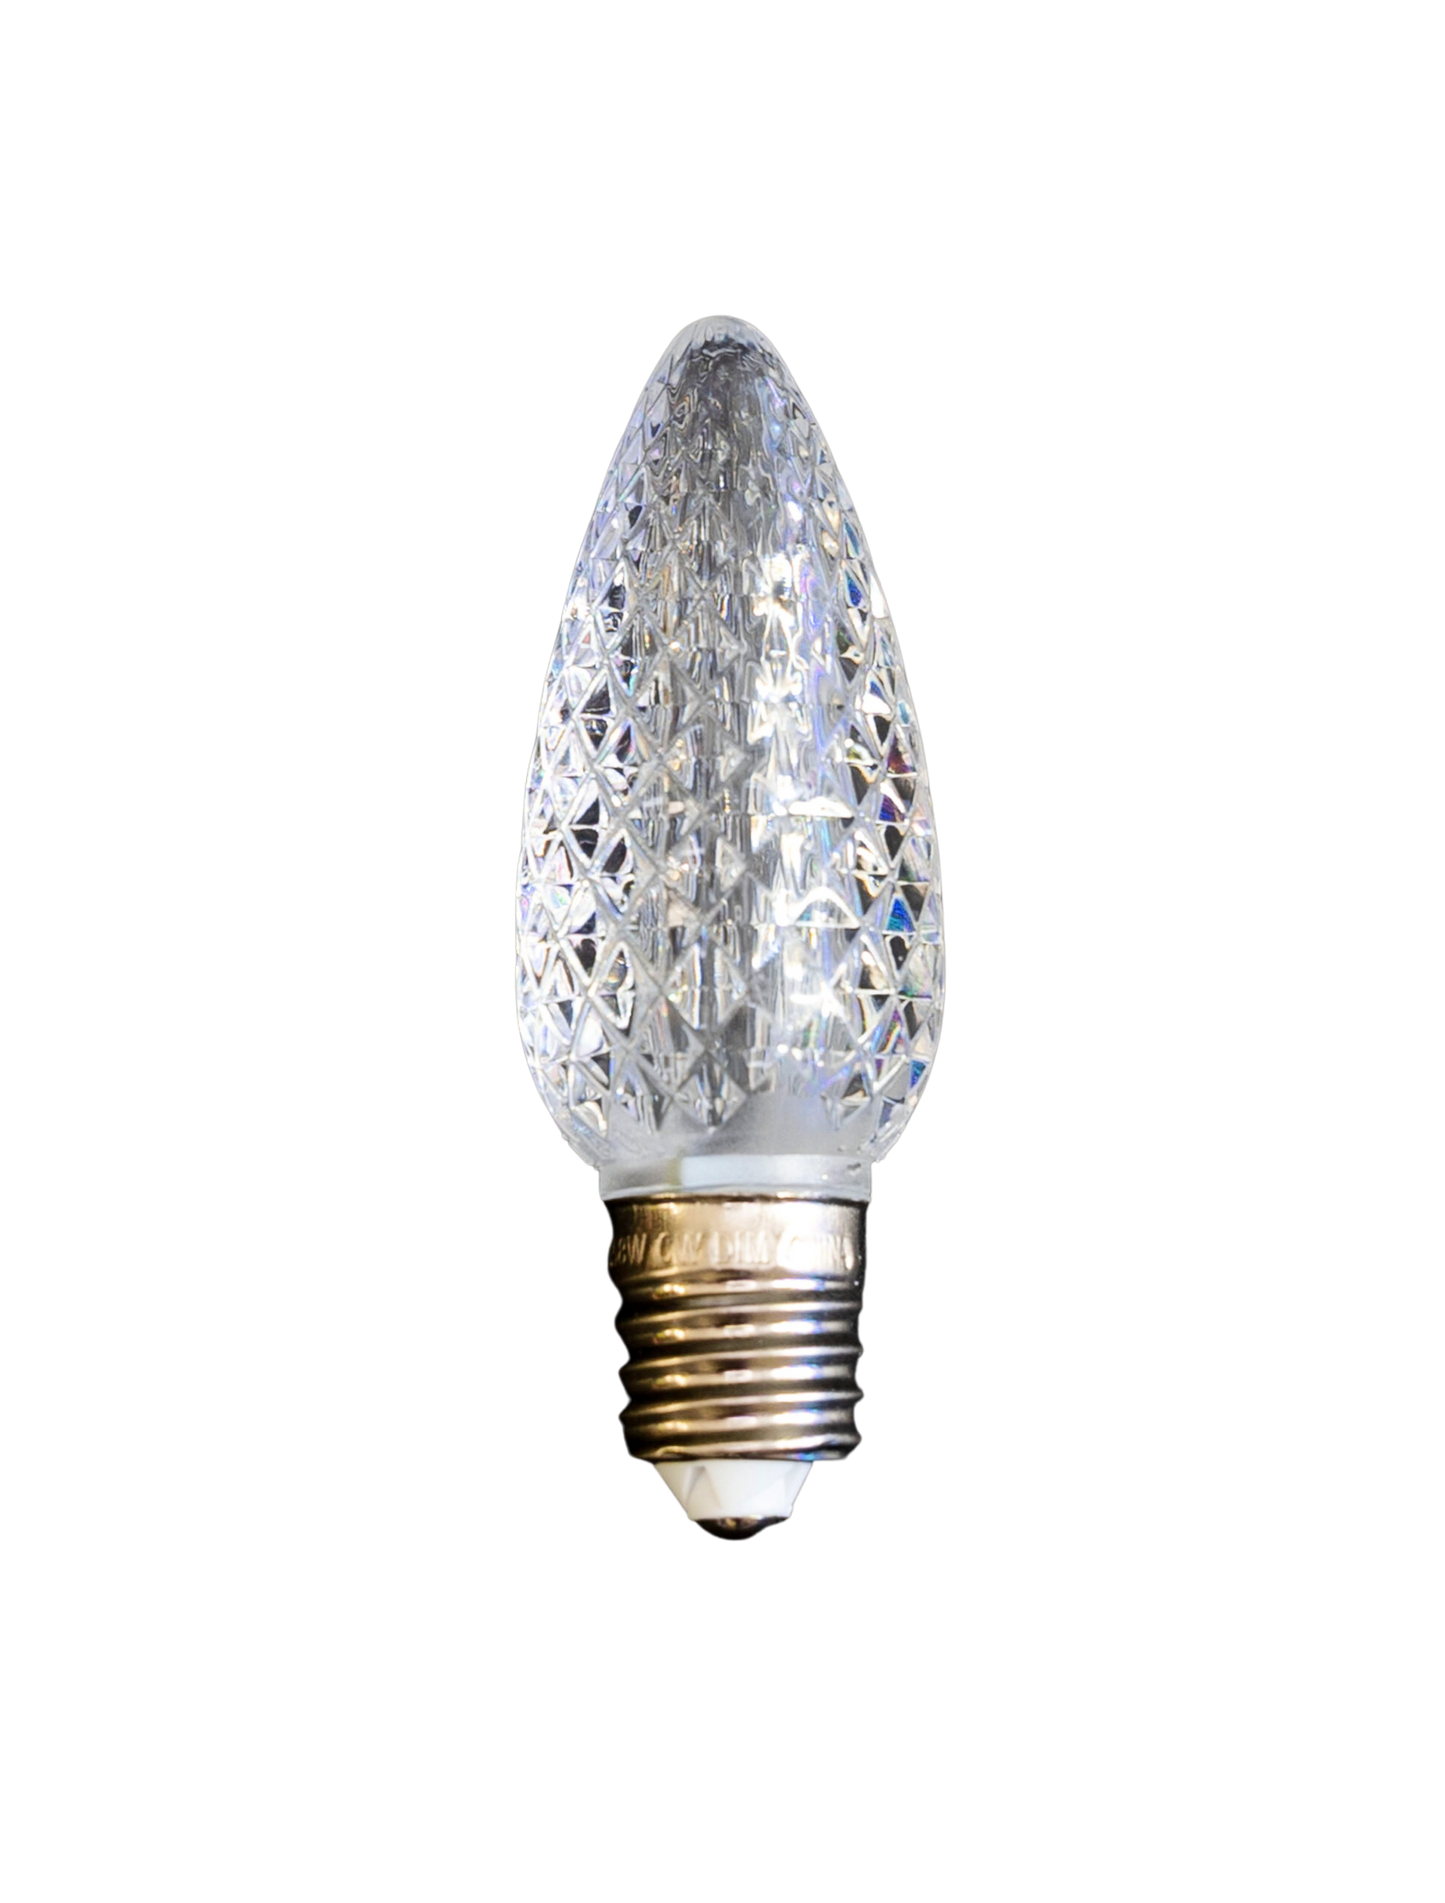 C9 Bulb Cool White - Lets Get Lit Supply